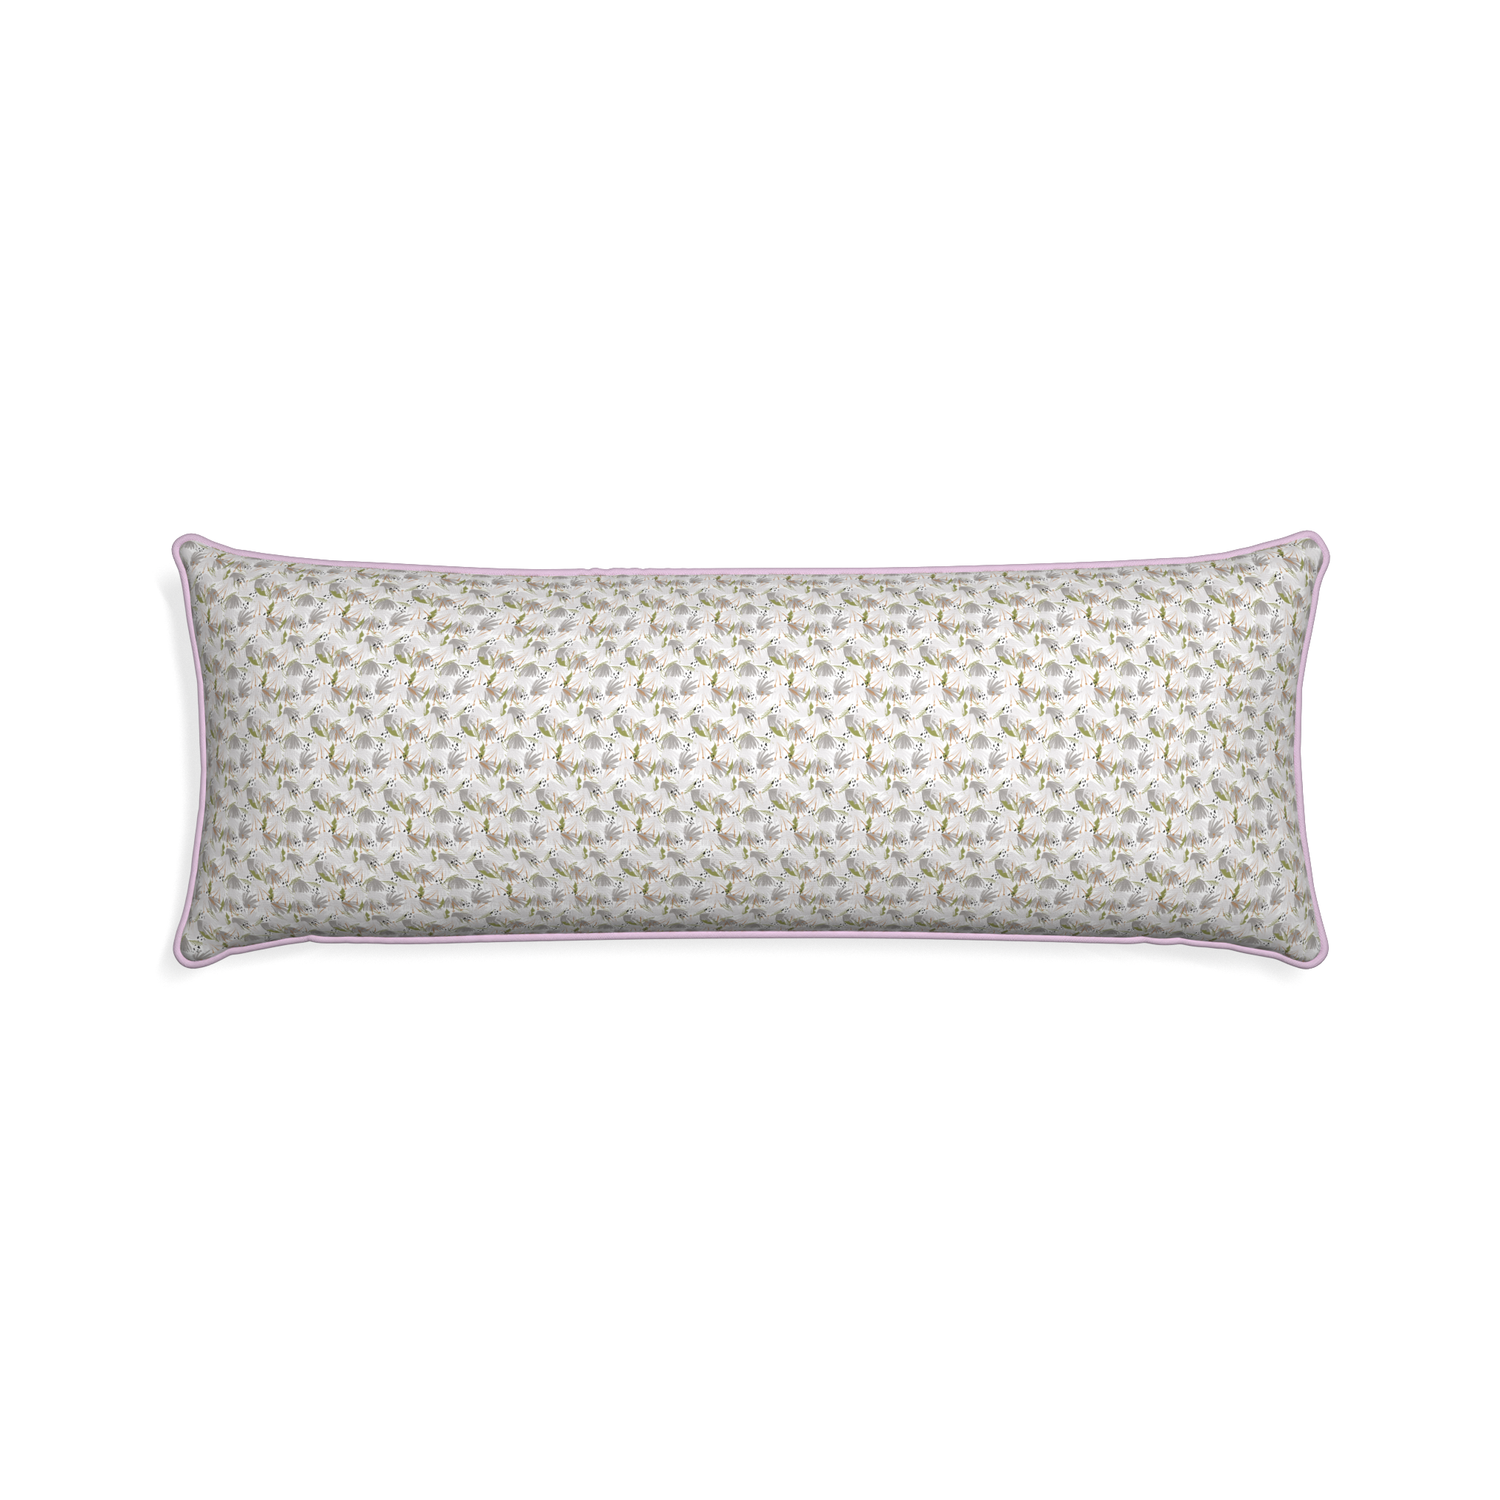 Xl-lumbar eden grey custom pillow with l piping on white background